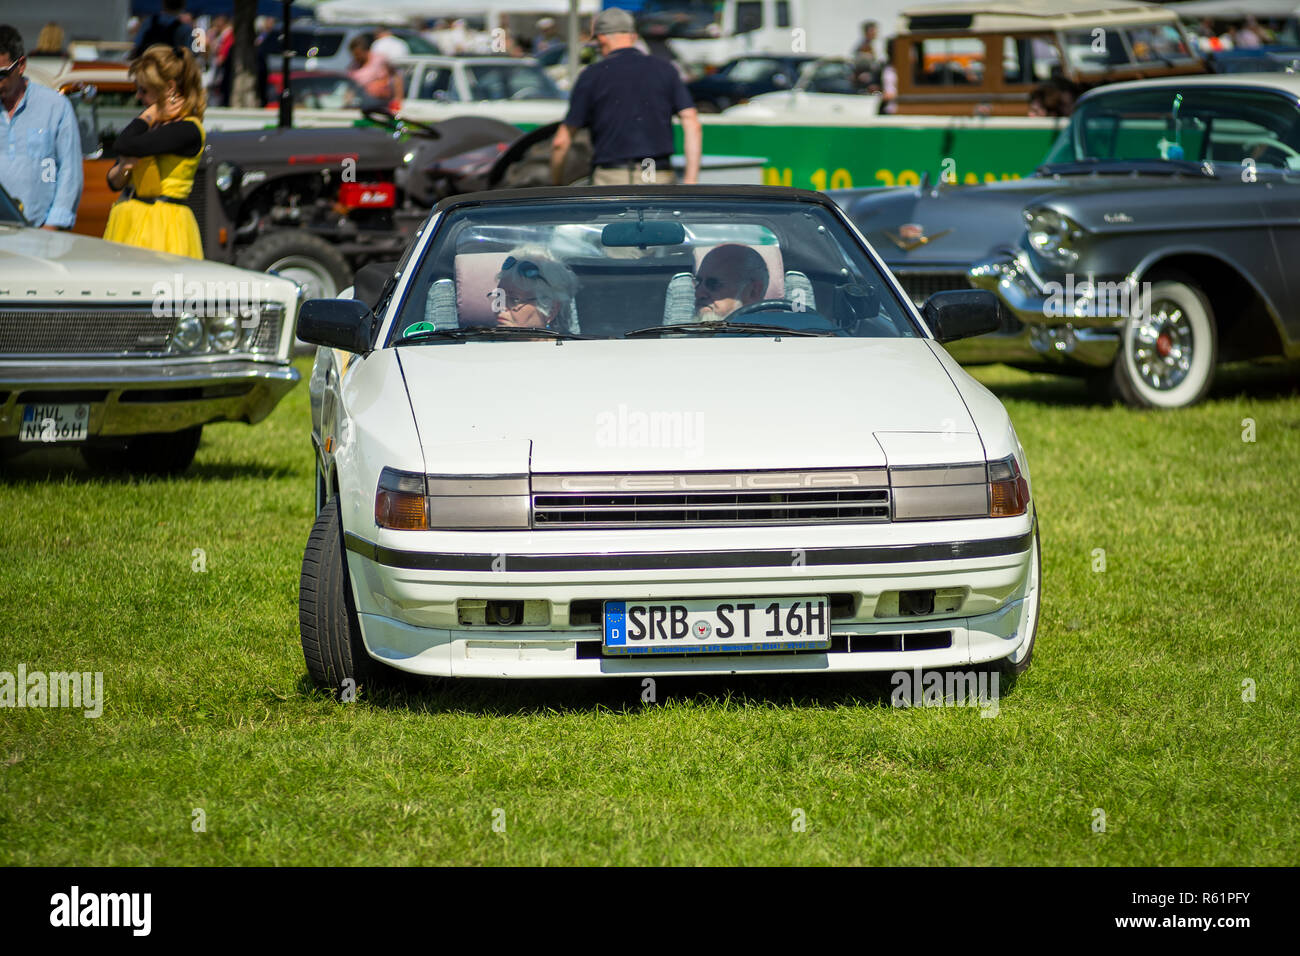 PAAREN IM GLIEN, GERMANY - MAY 19, 2018: Sports car Toyota Celica T160, 1985. Die Oldtimer Show 2018. Stock Photo